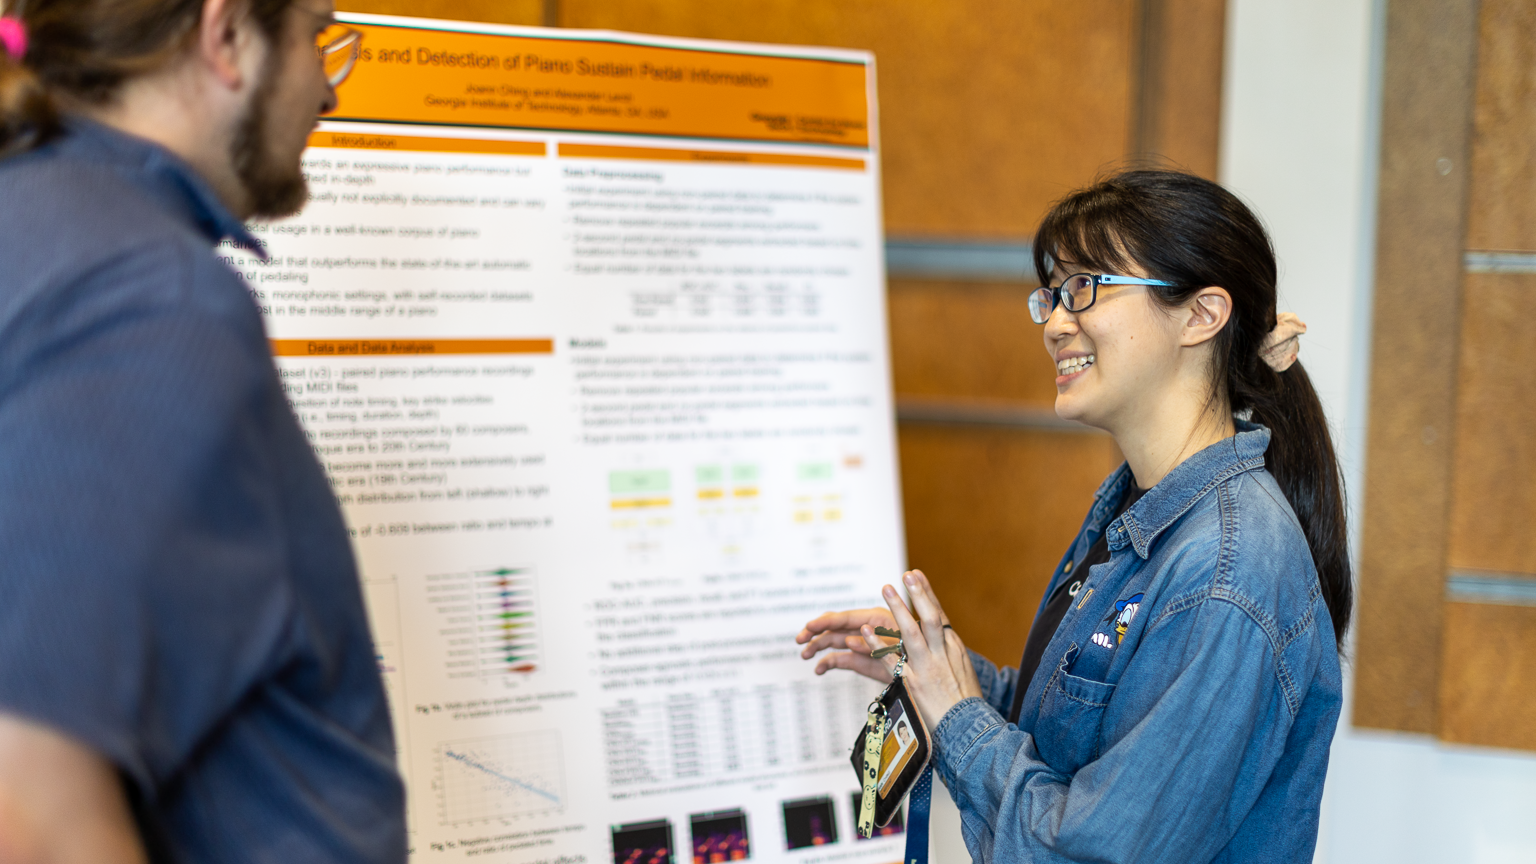 Joann Ching explaining her research at a poster show